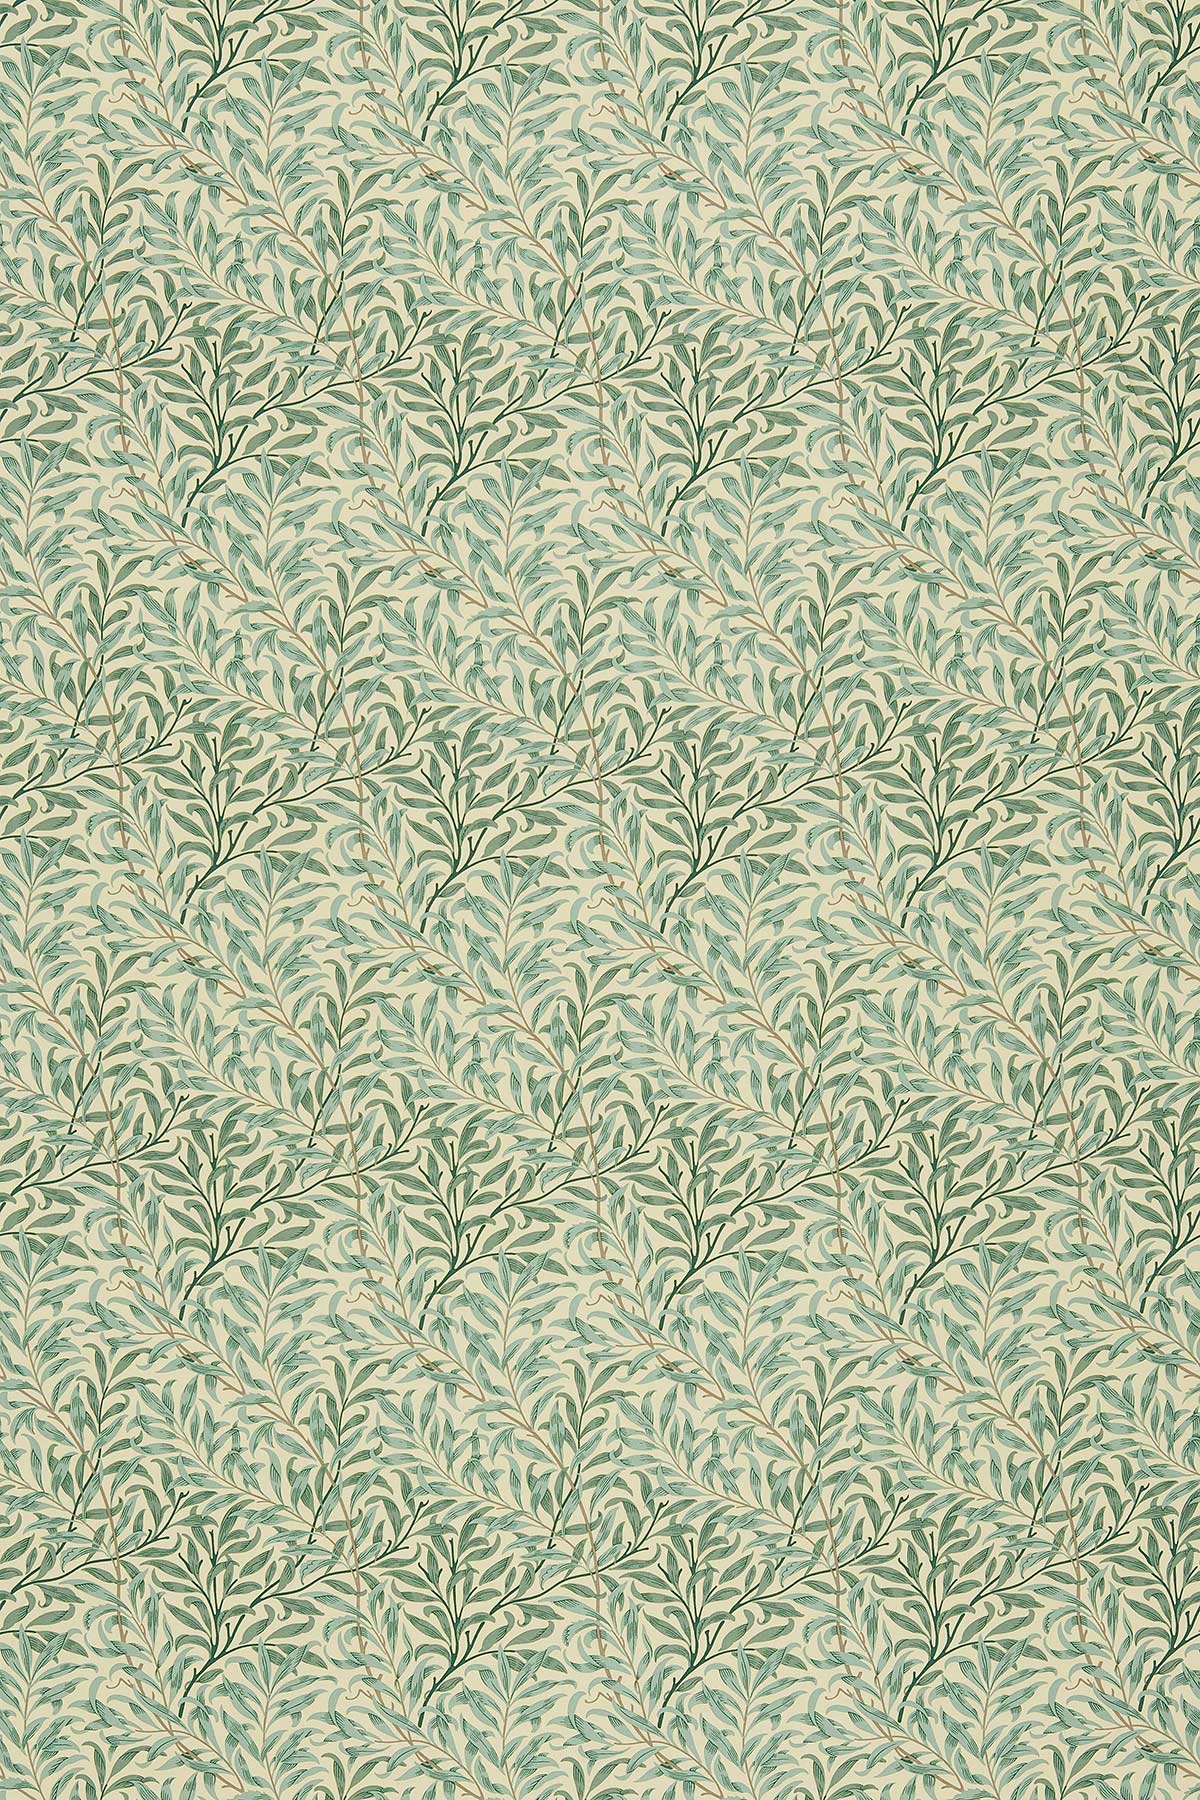 Willow Bough Fabric - Cream / Pale Green - by Morris